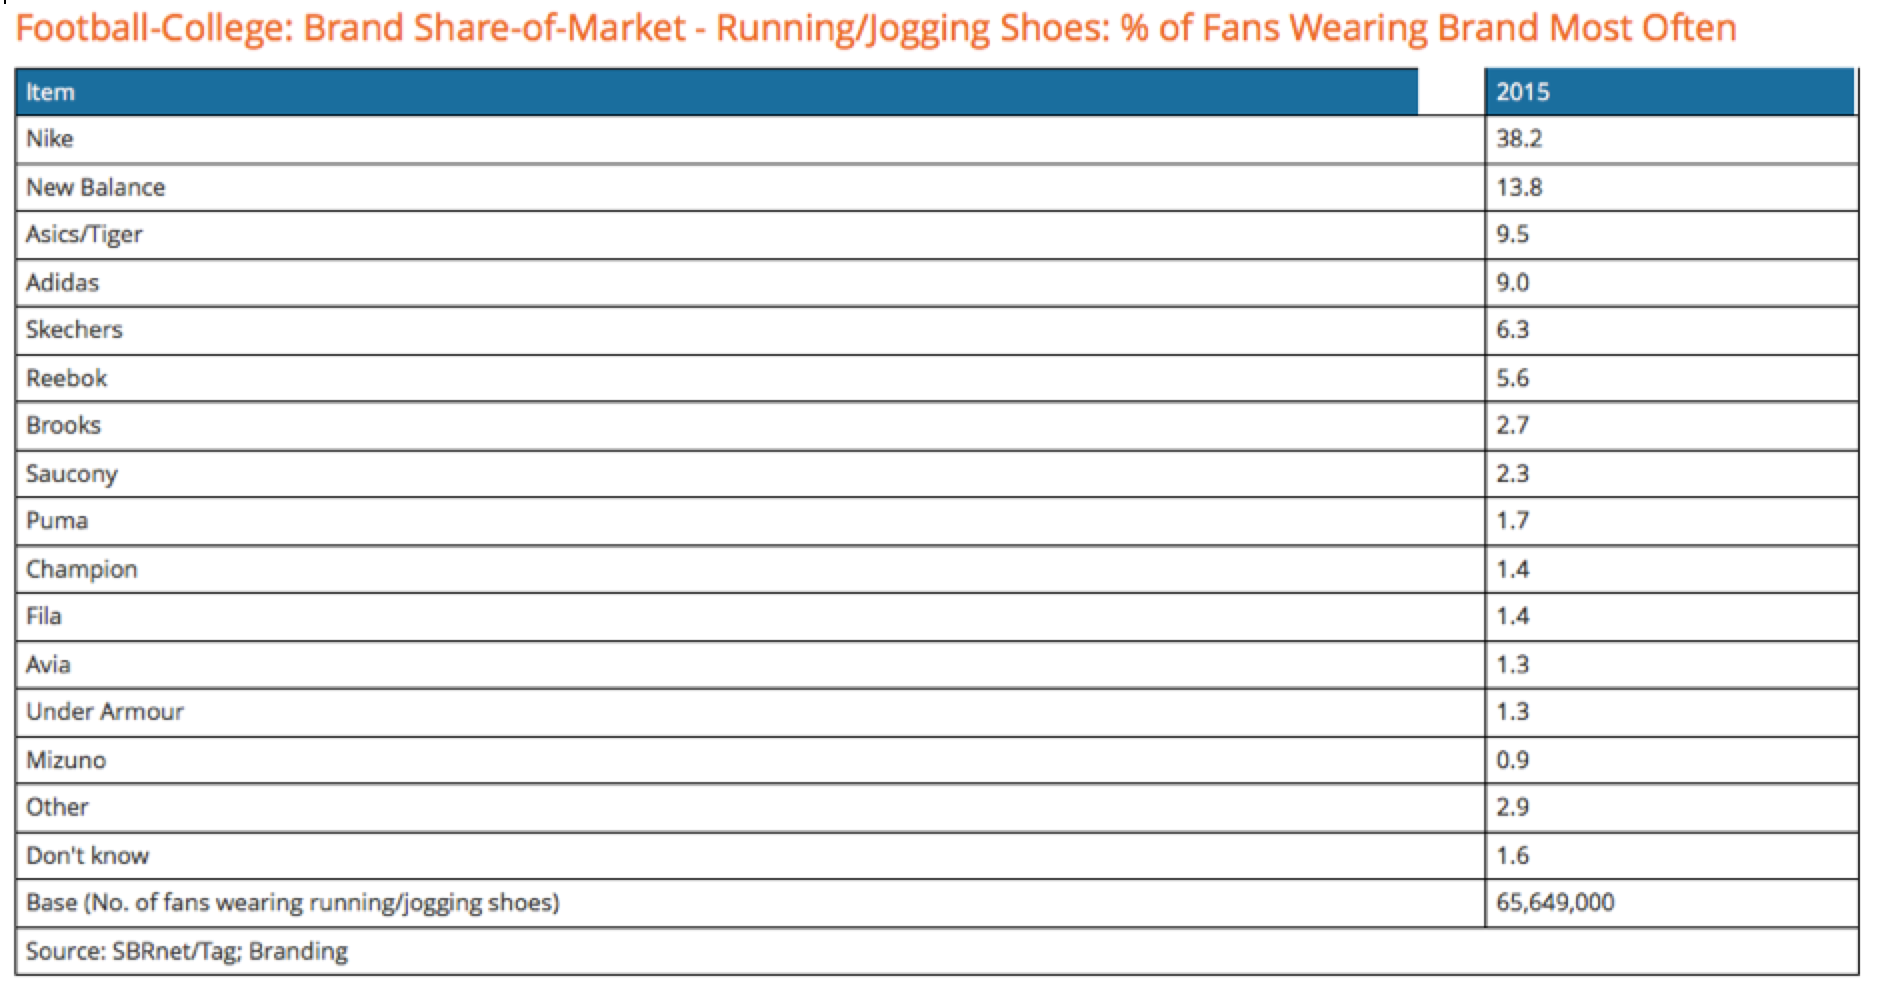 Football College Brand Share of Market, Running/Jogging Shoes